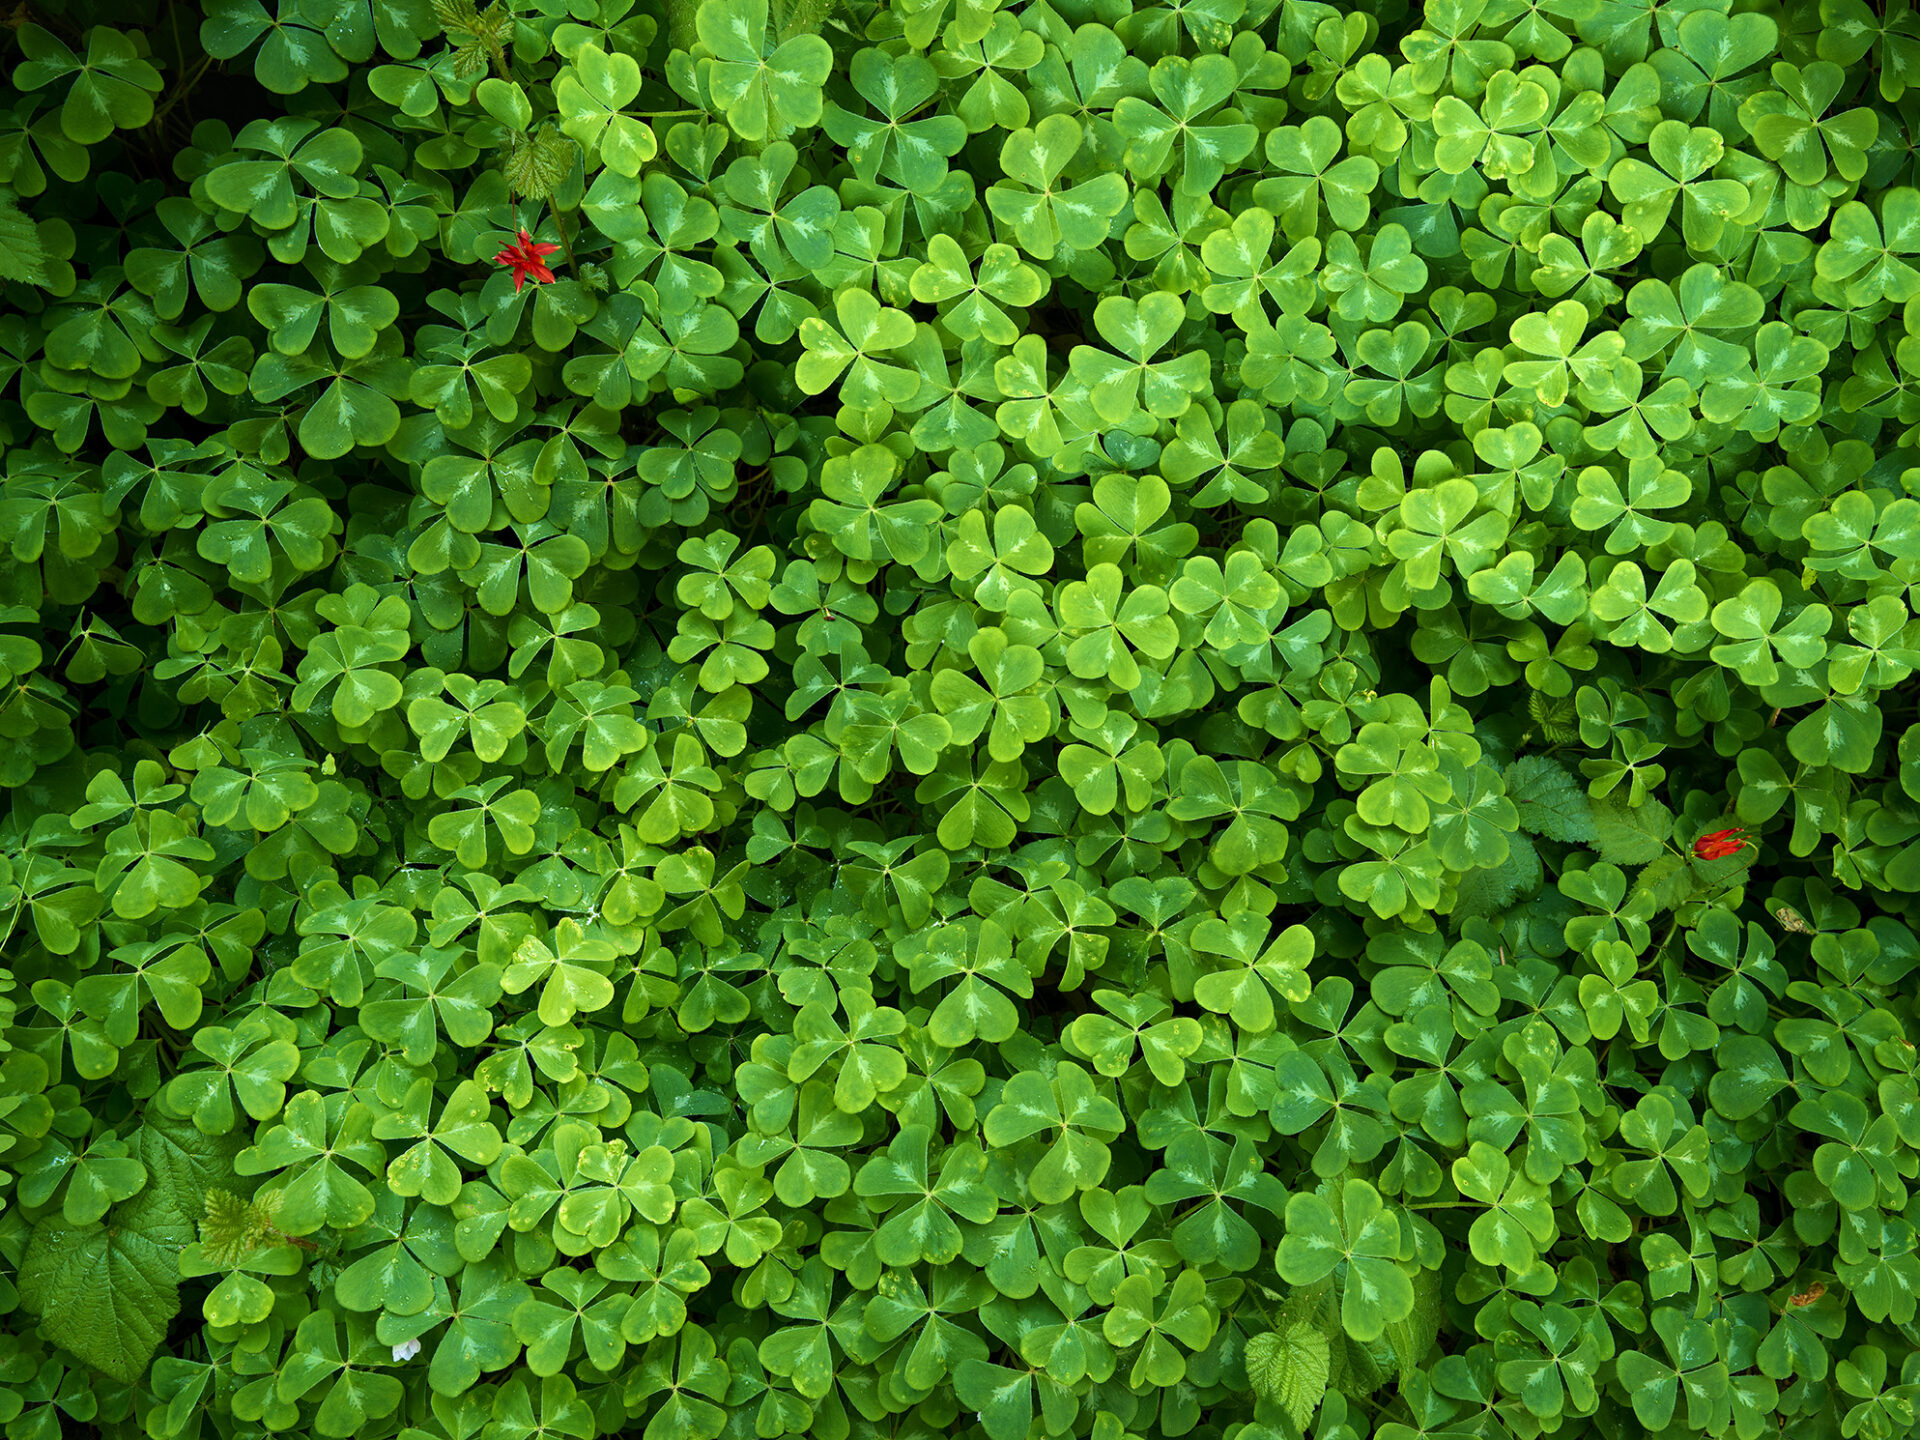 Find the four leaf clover among hundreds of clovers.